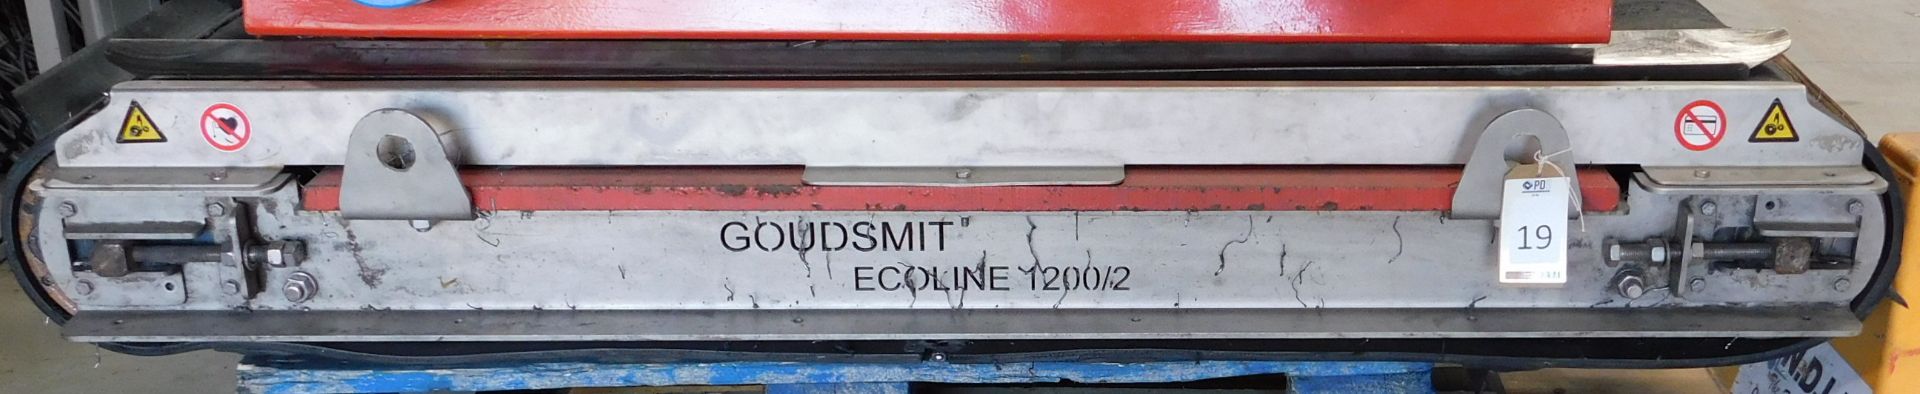 Goudsmit Ecoline 1200/2 Magnetic Over Belt (Location Brentwood. Please Refer to General Notes)